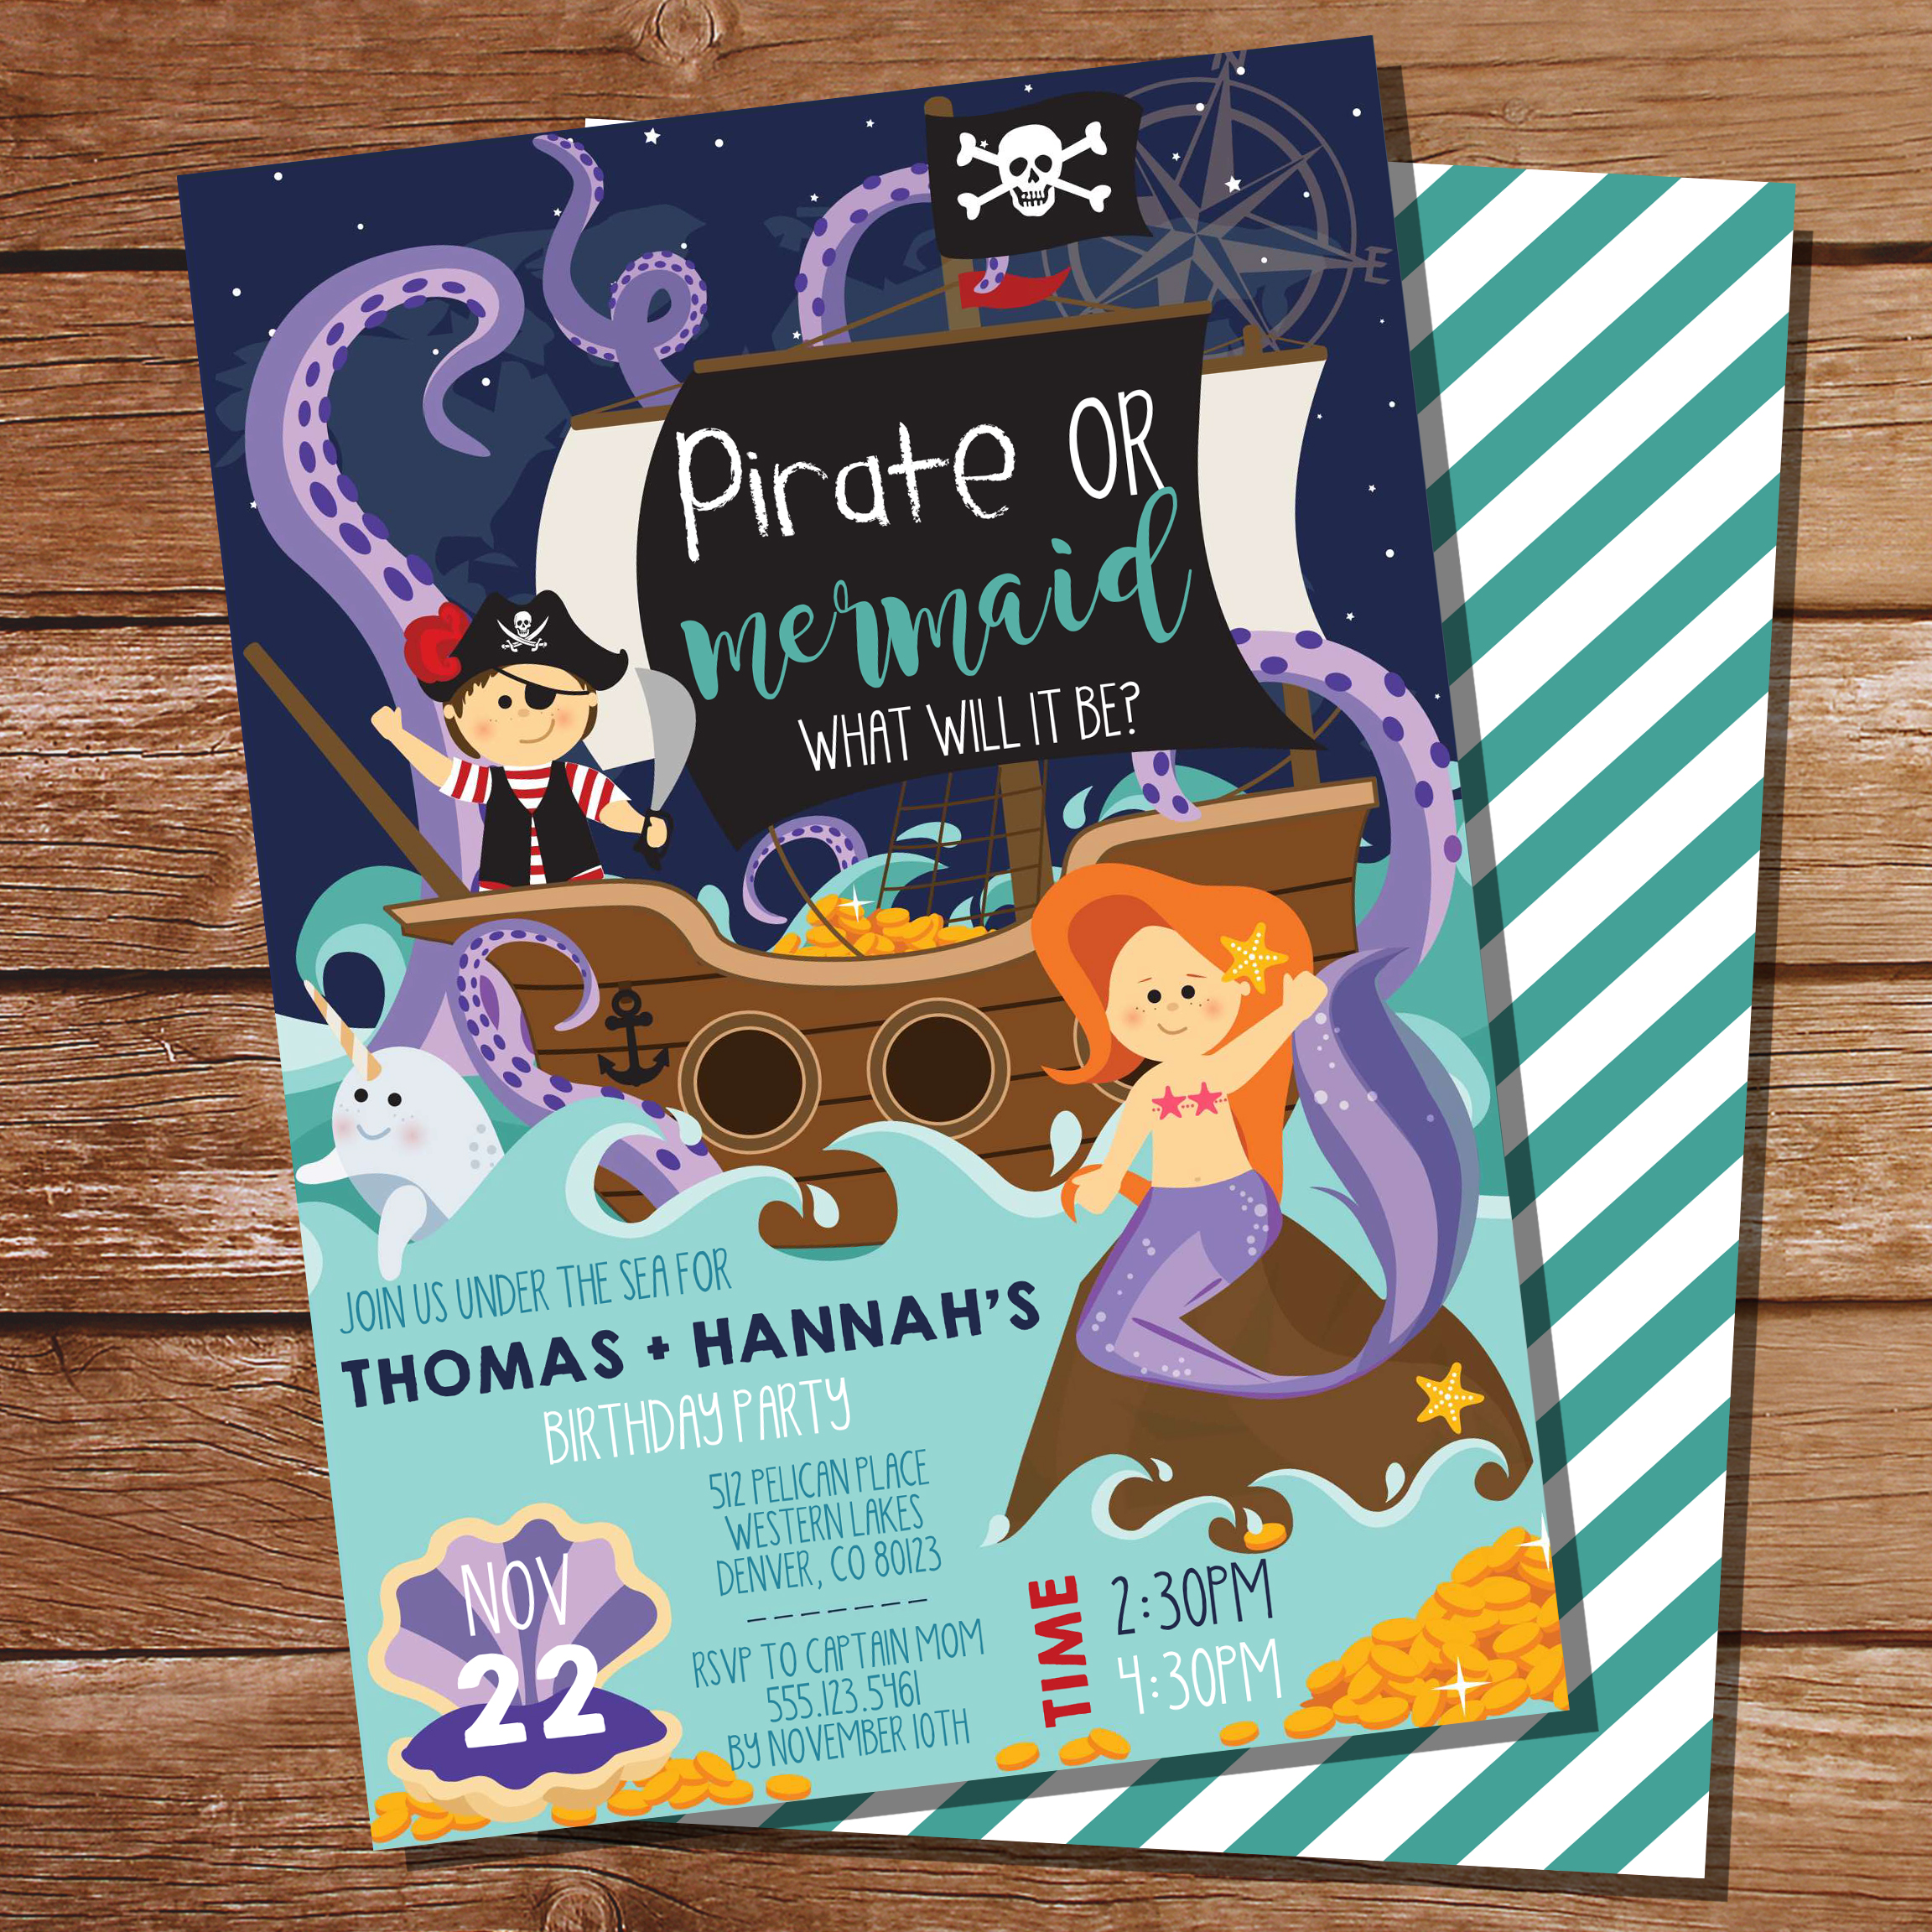 Pirate and Mermaid Editable Party Invitation